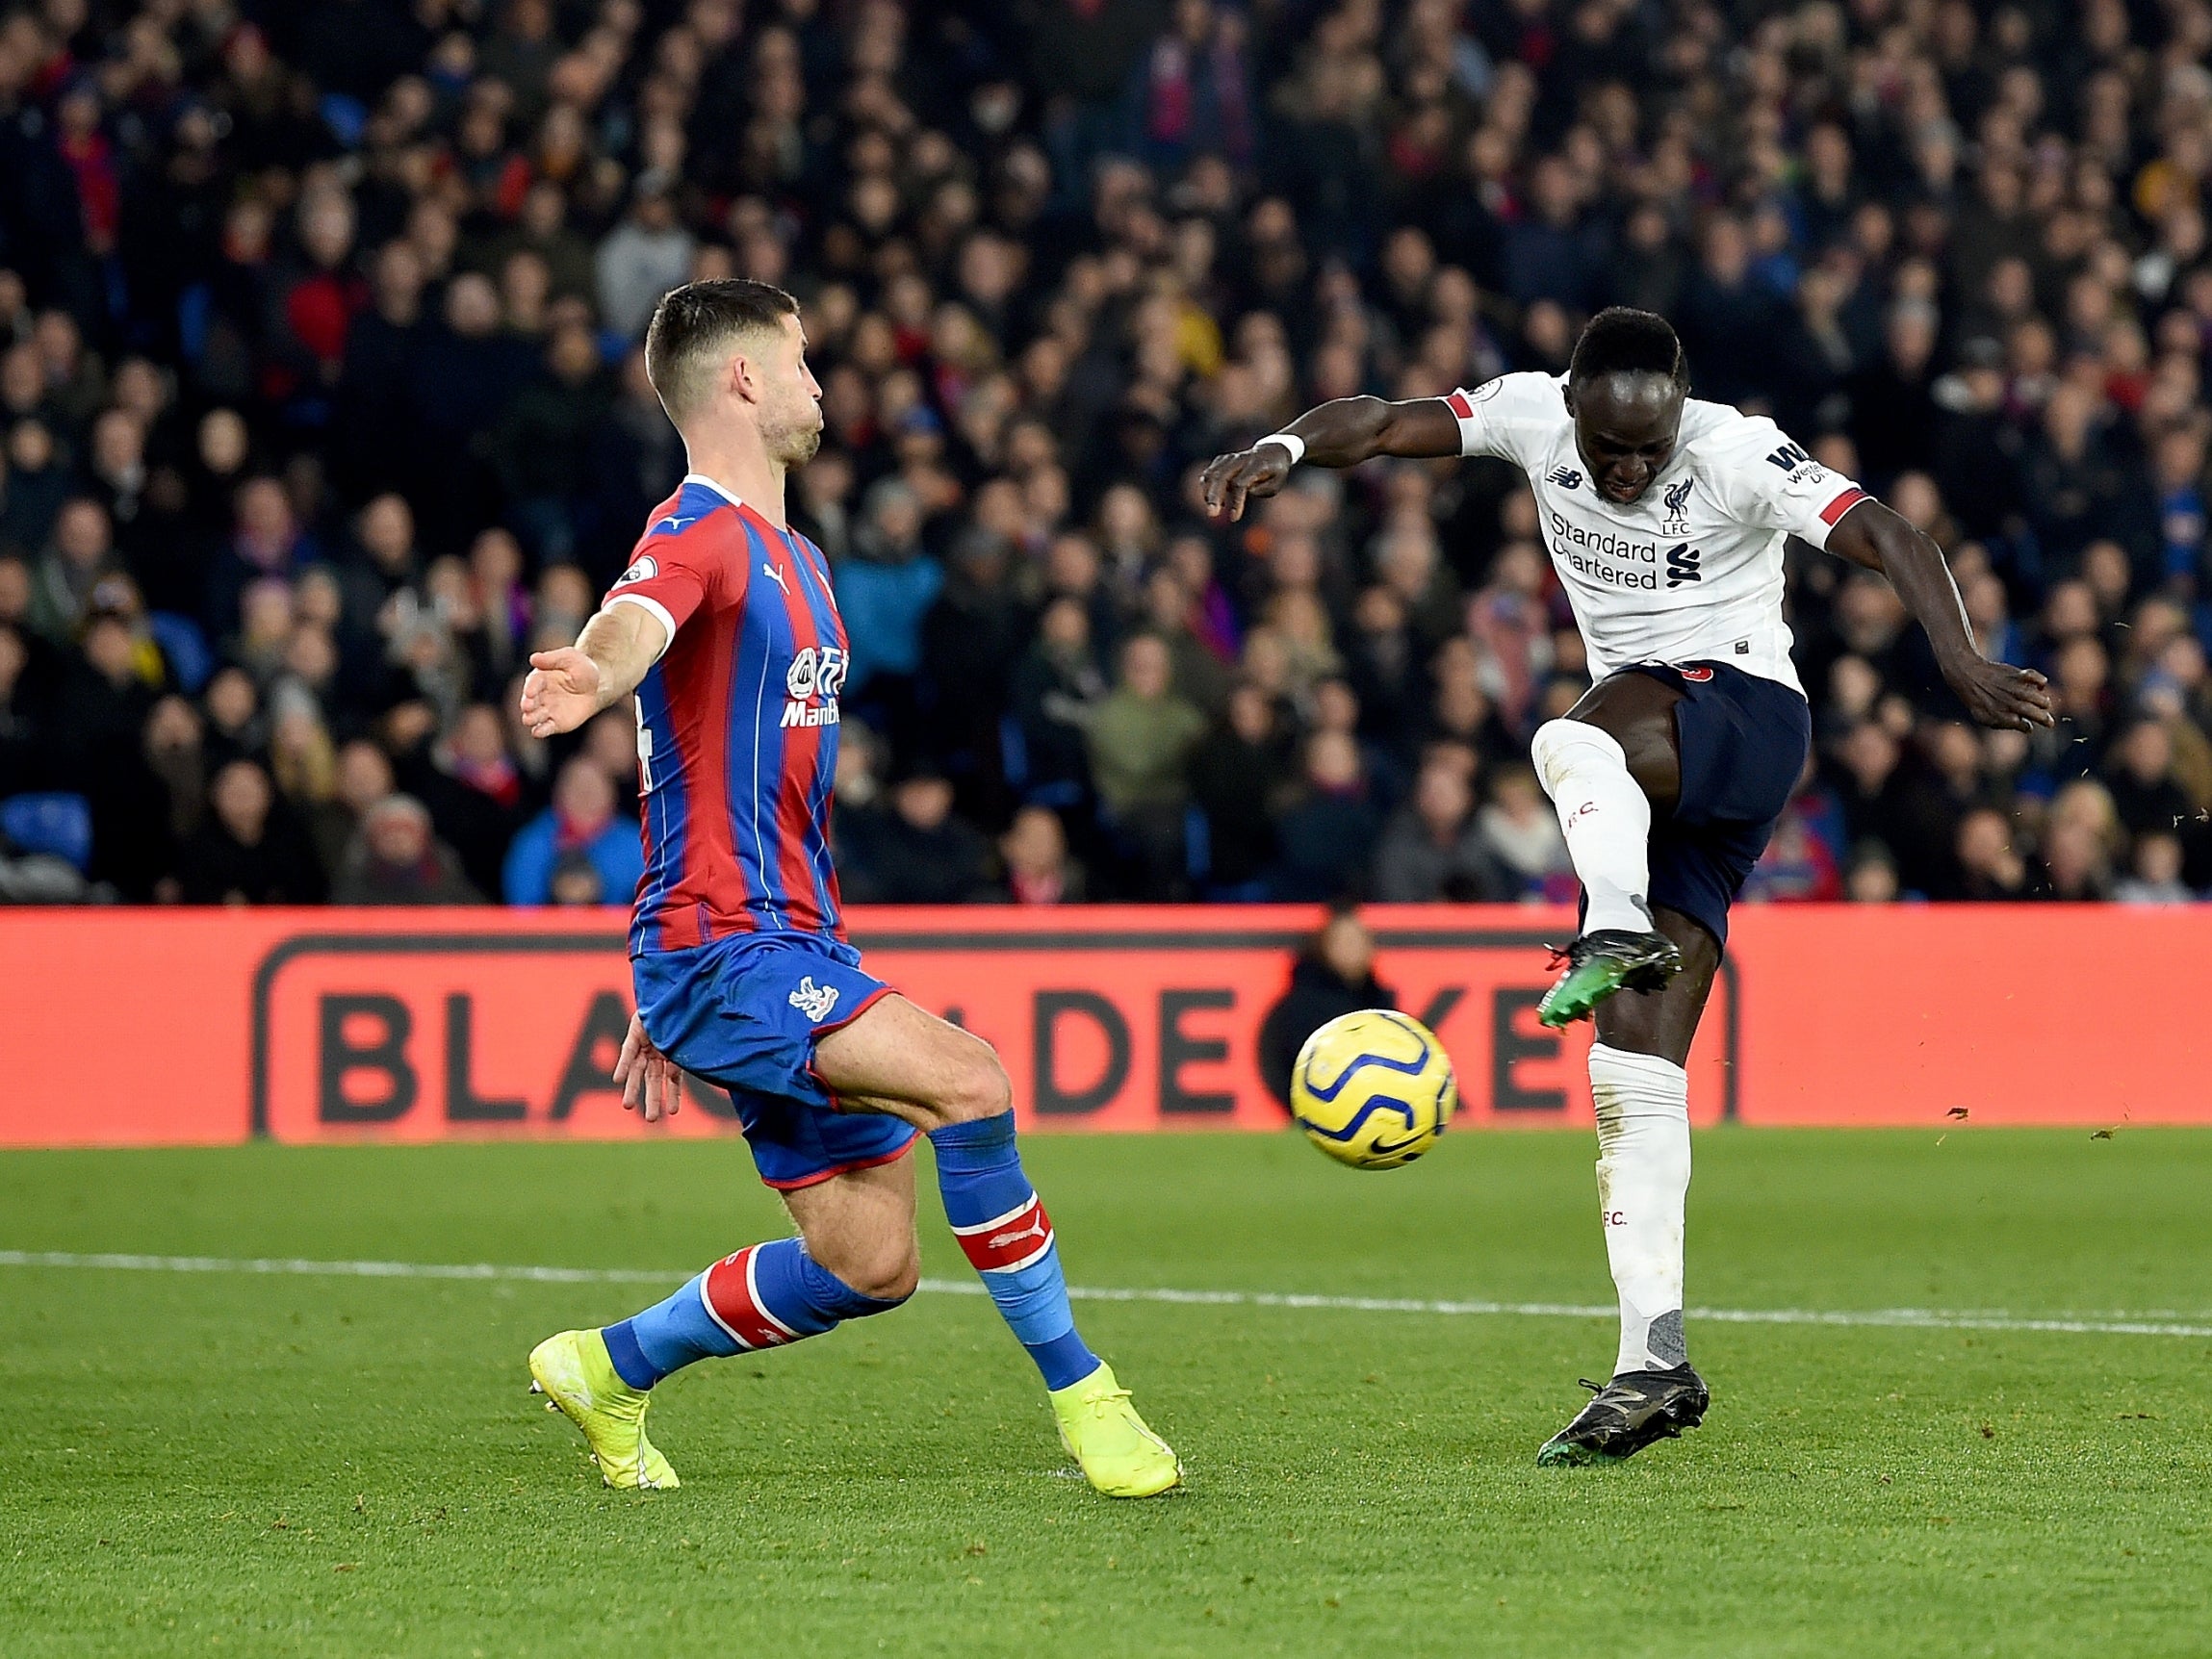 Crystal Palace vs Liverpool player ratings: Sadio Mane shines as leaders pinch all three points